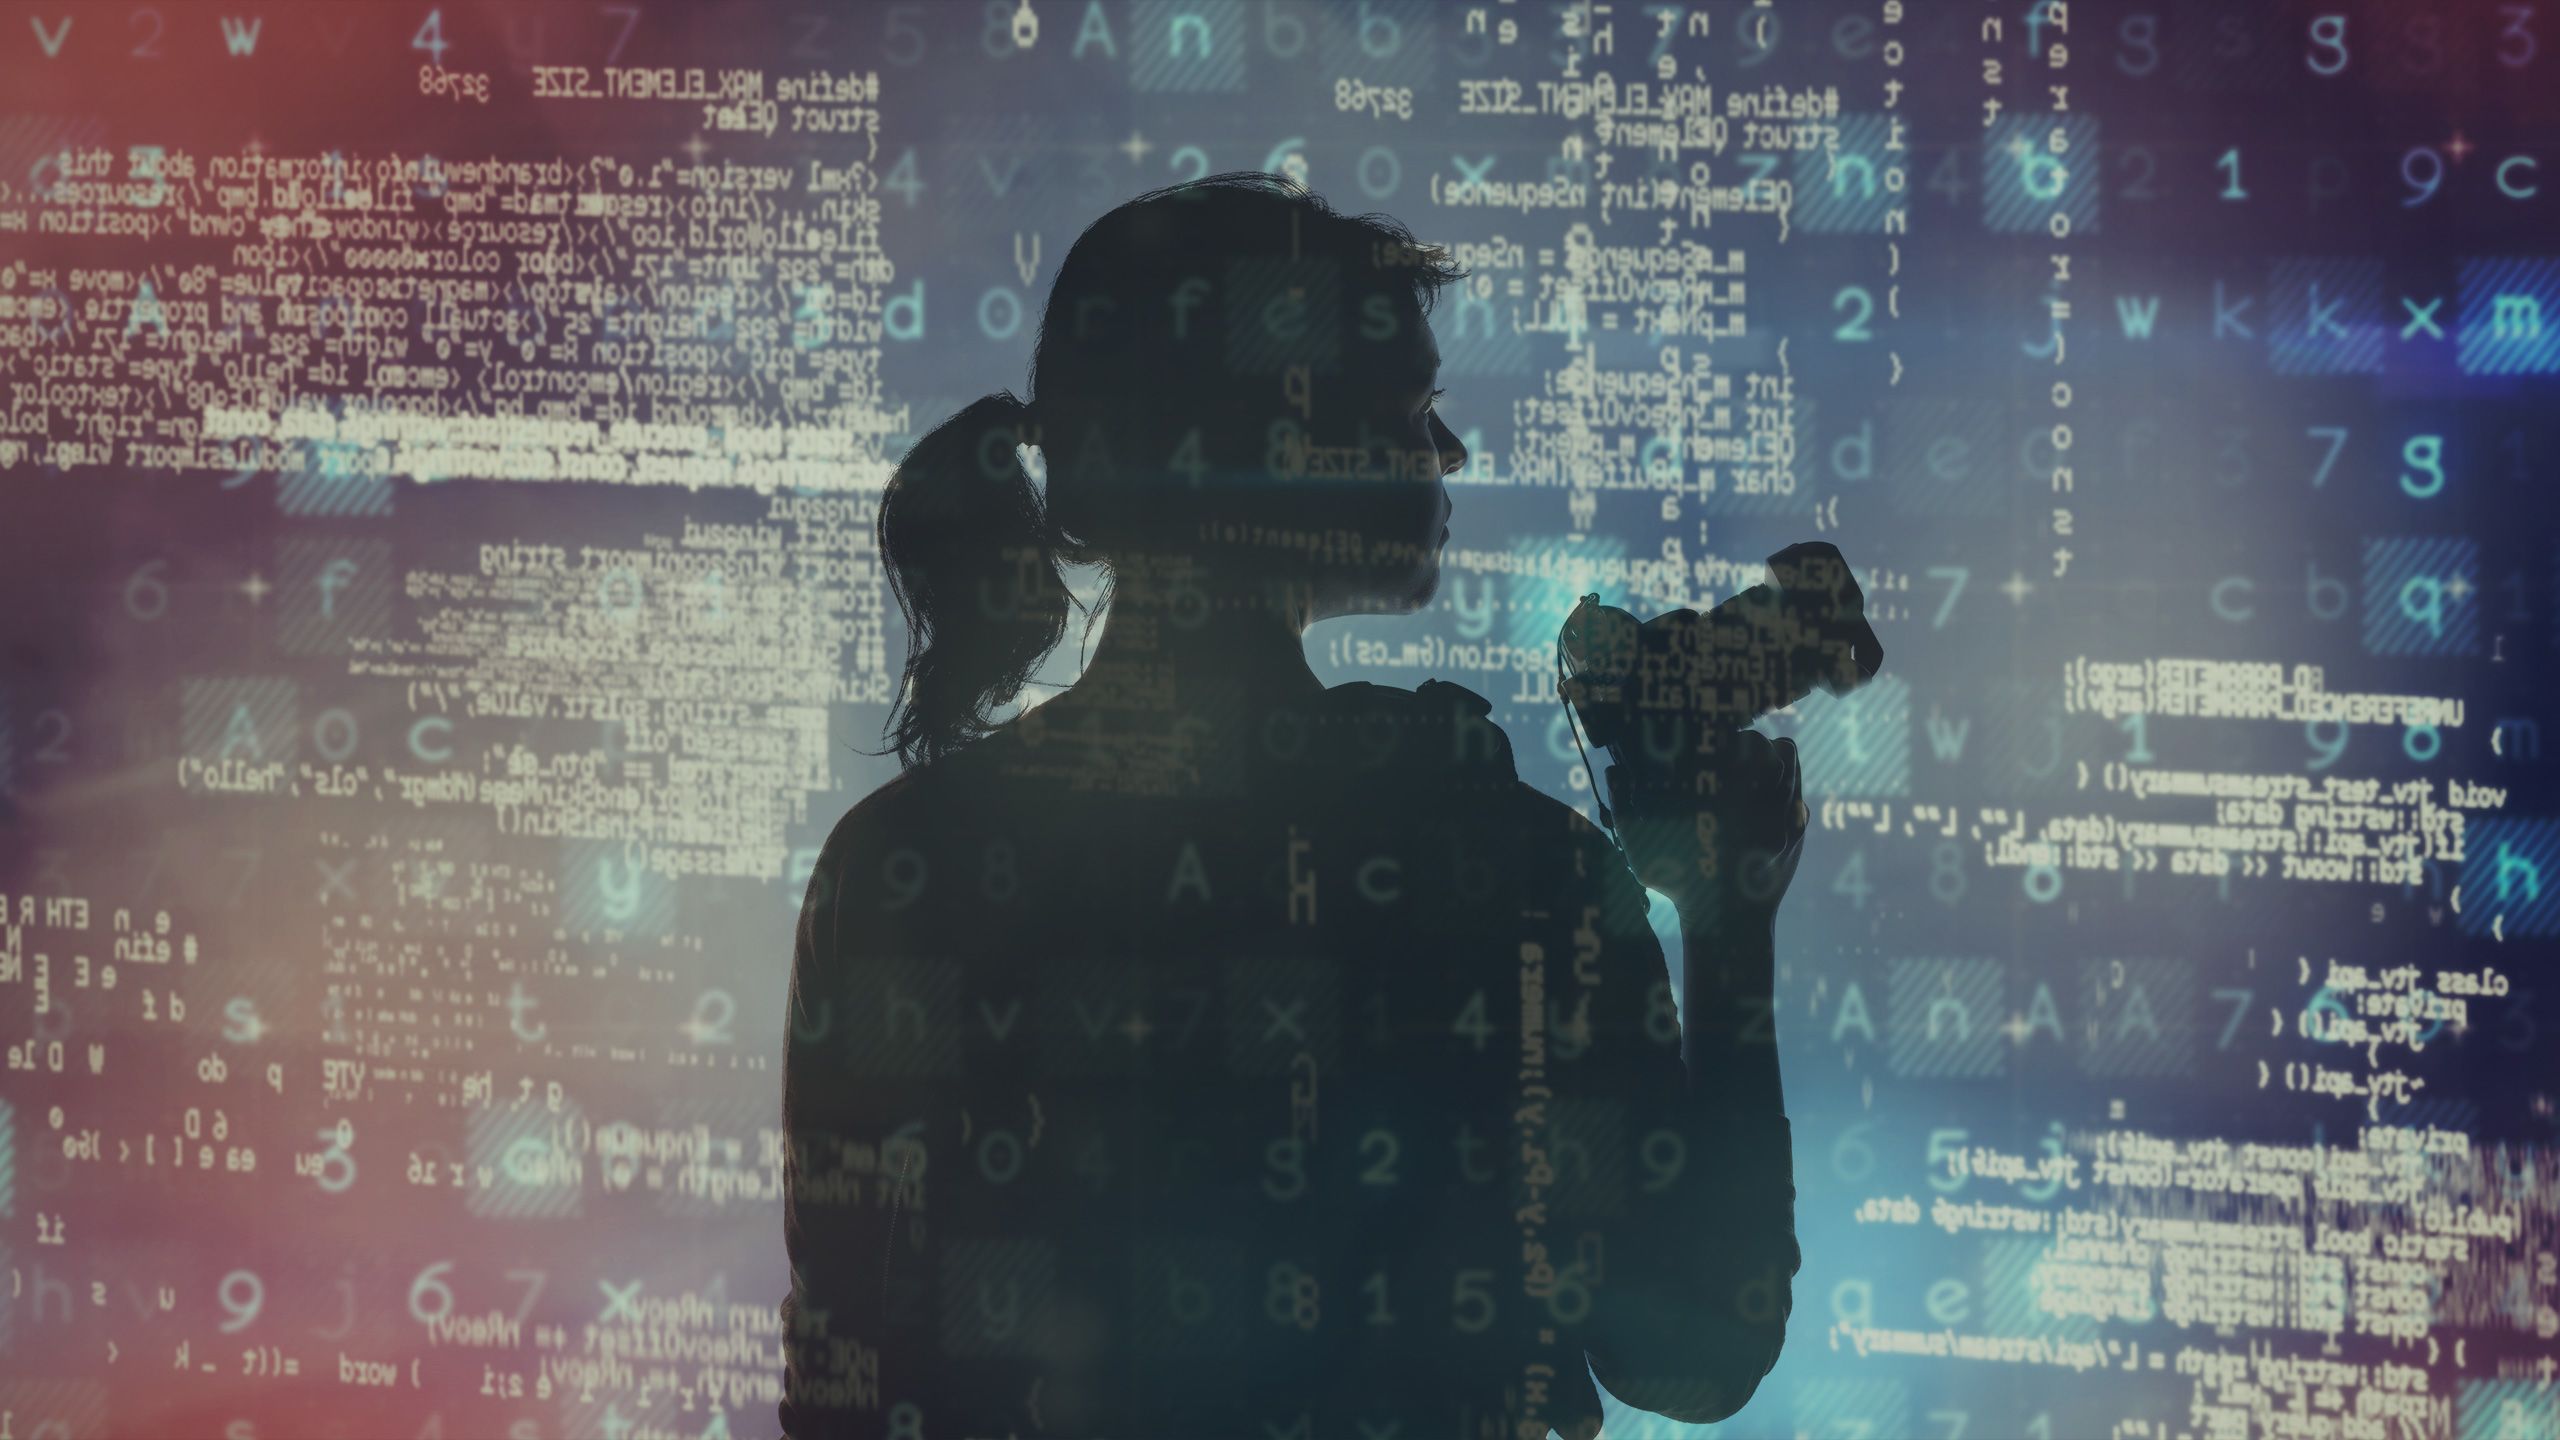 A backlit silhouette of a female photo journalist overlaid on an image of digital data.